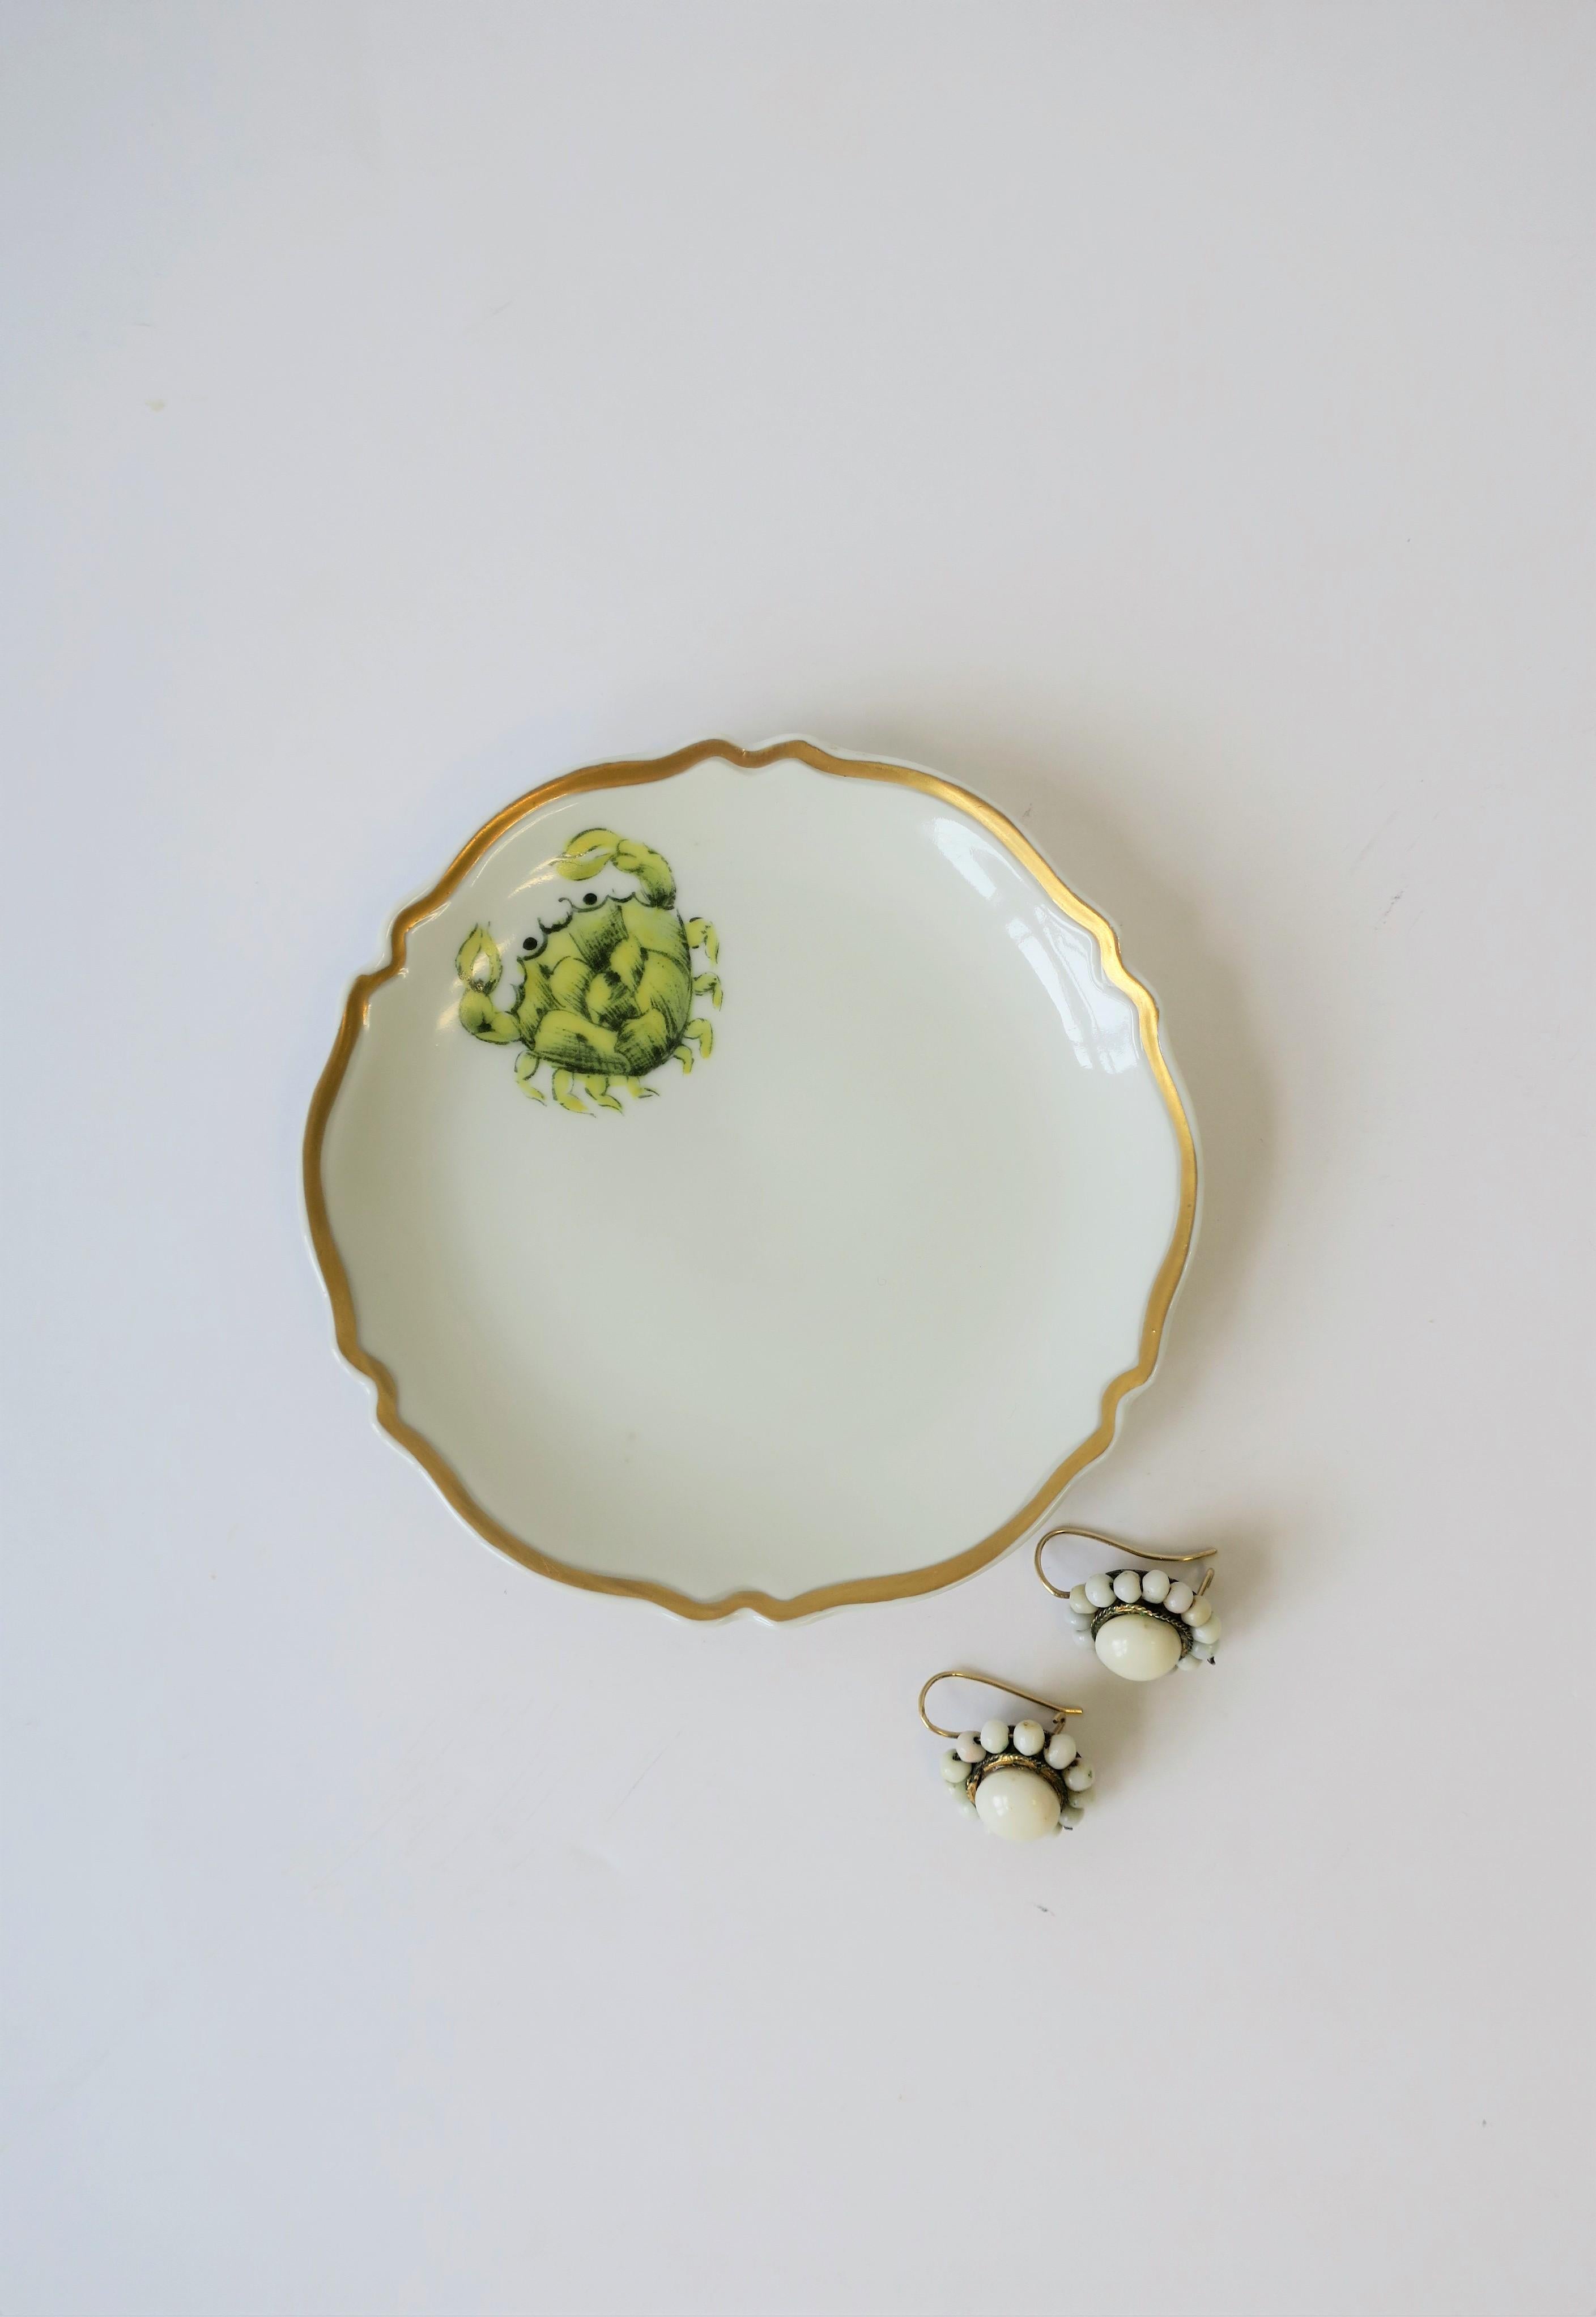 20th Century French White and Gold Porcelain Jewelry Dish with Crab Signed by Designer